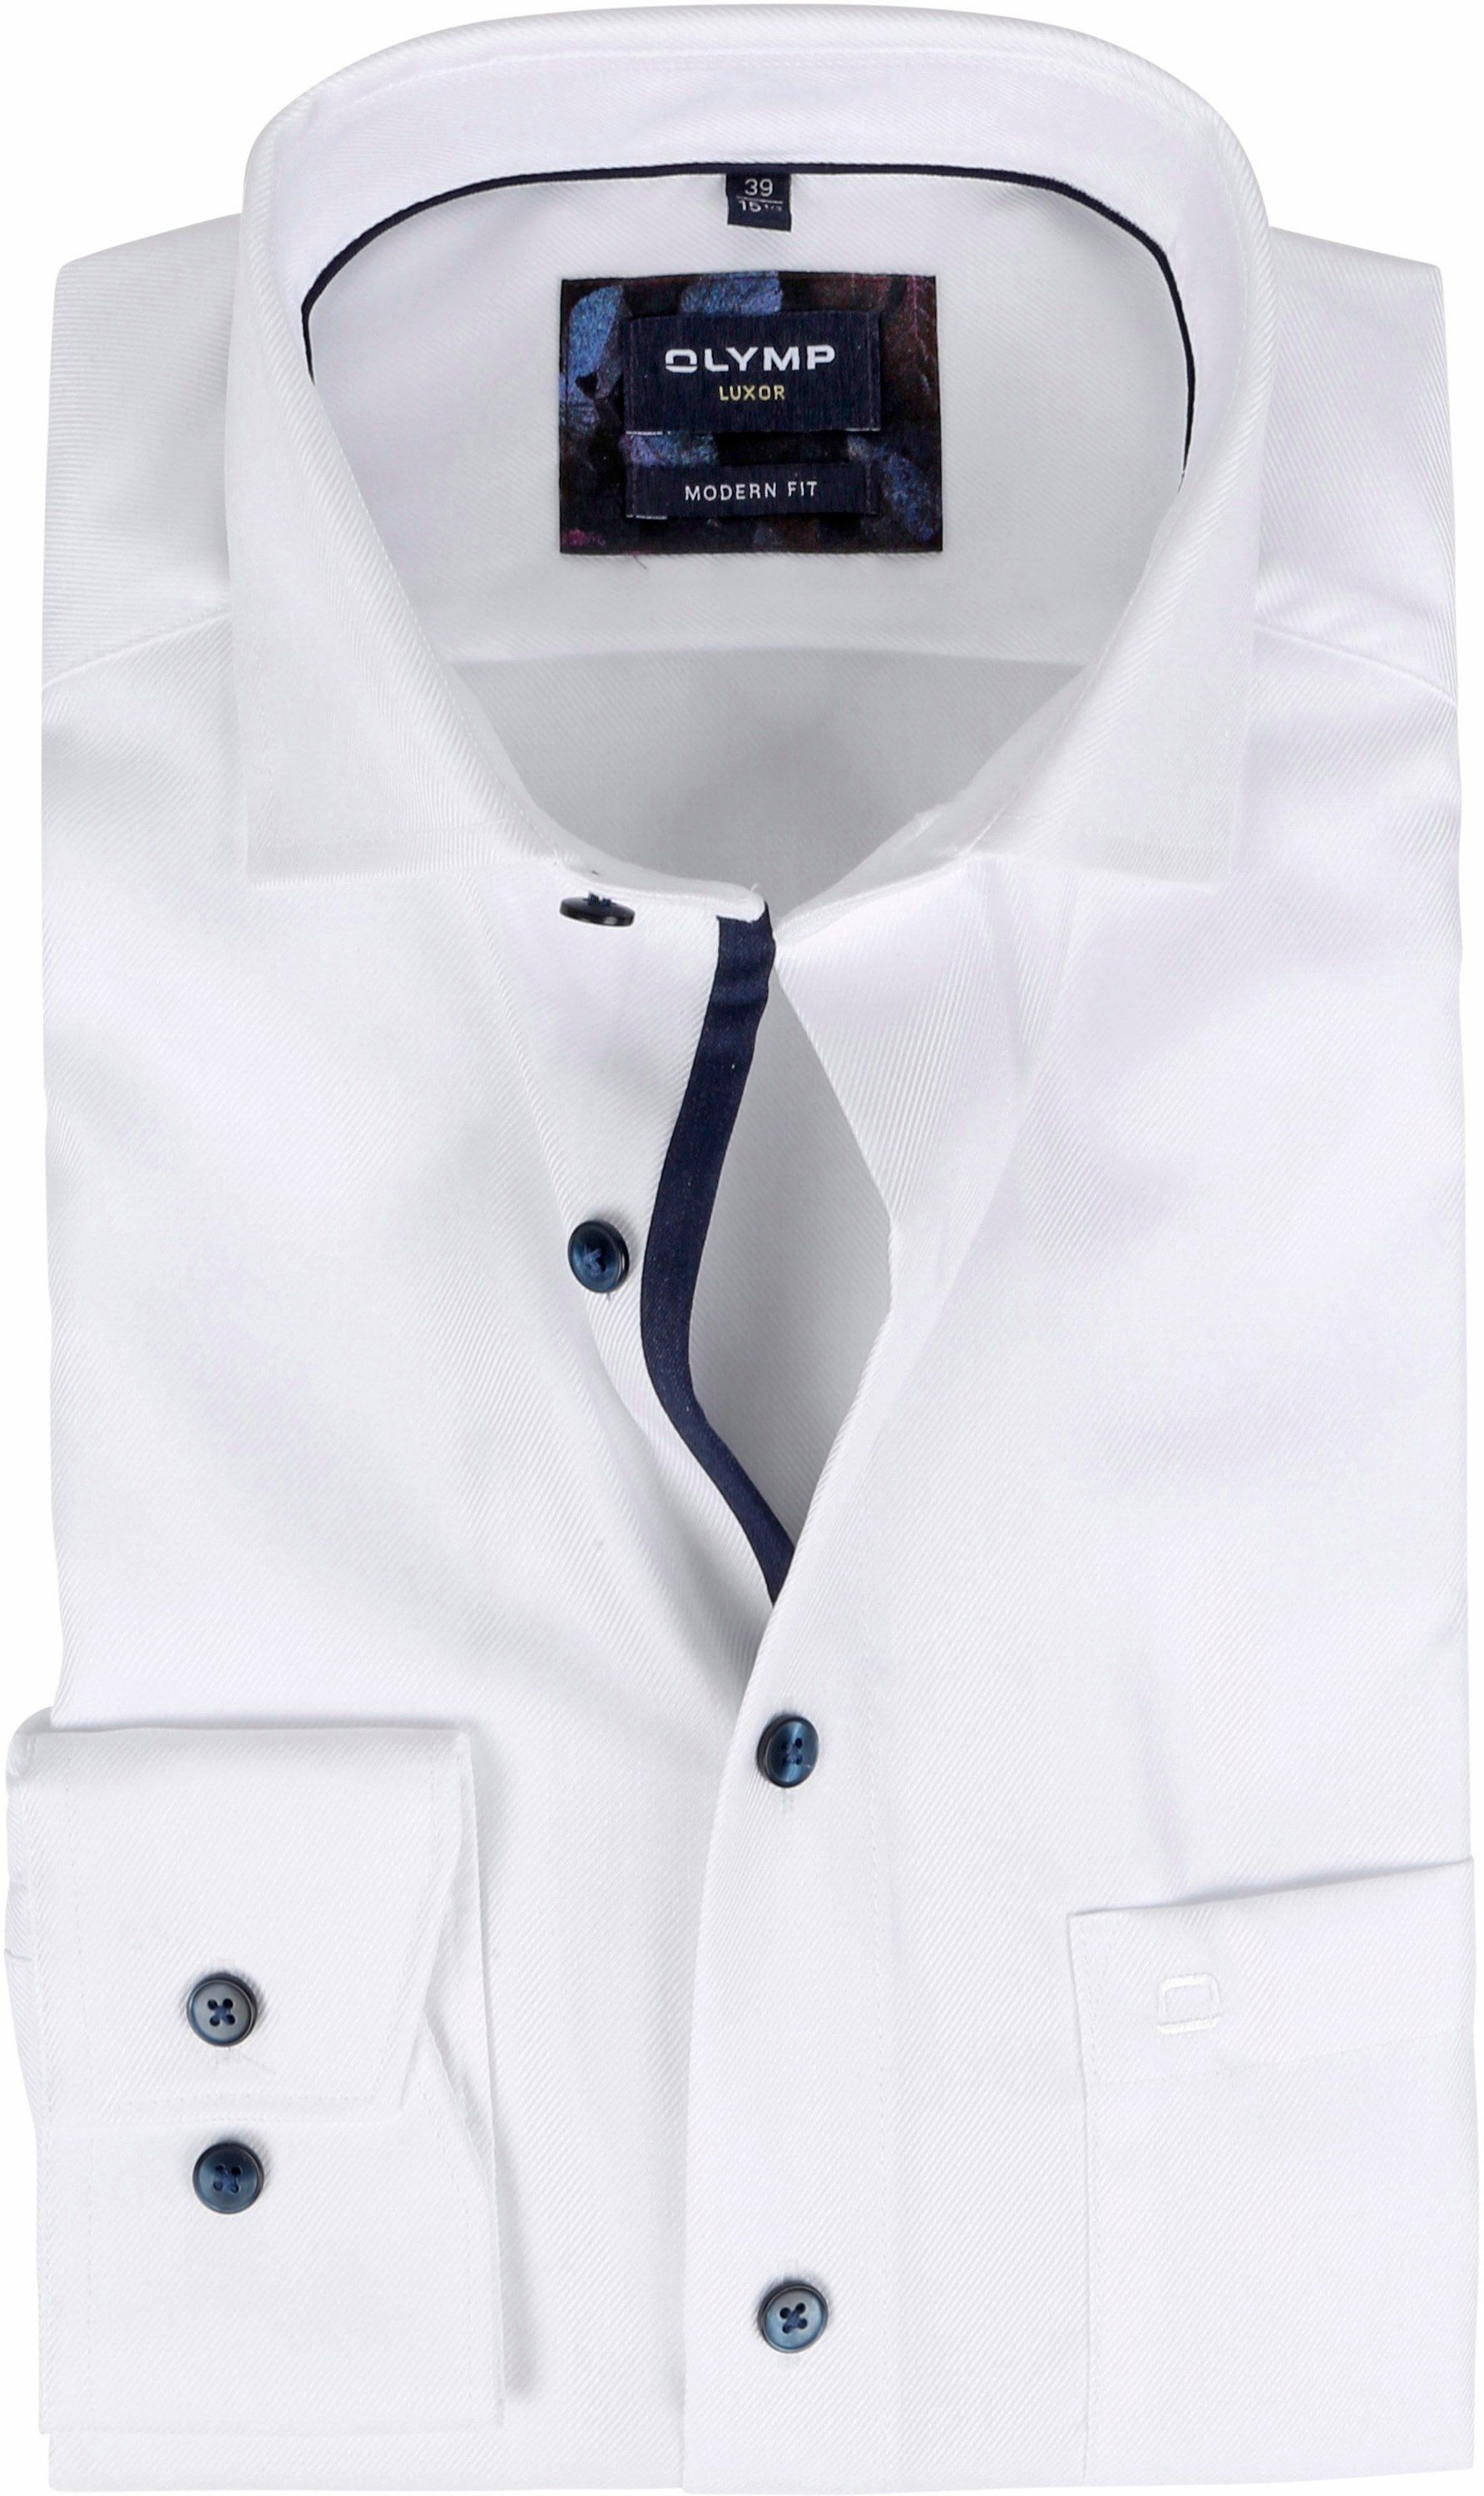 Olymp Luxor Shirt Modern-Fit 74364 White size 15